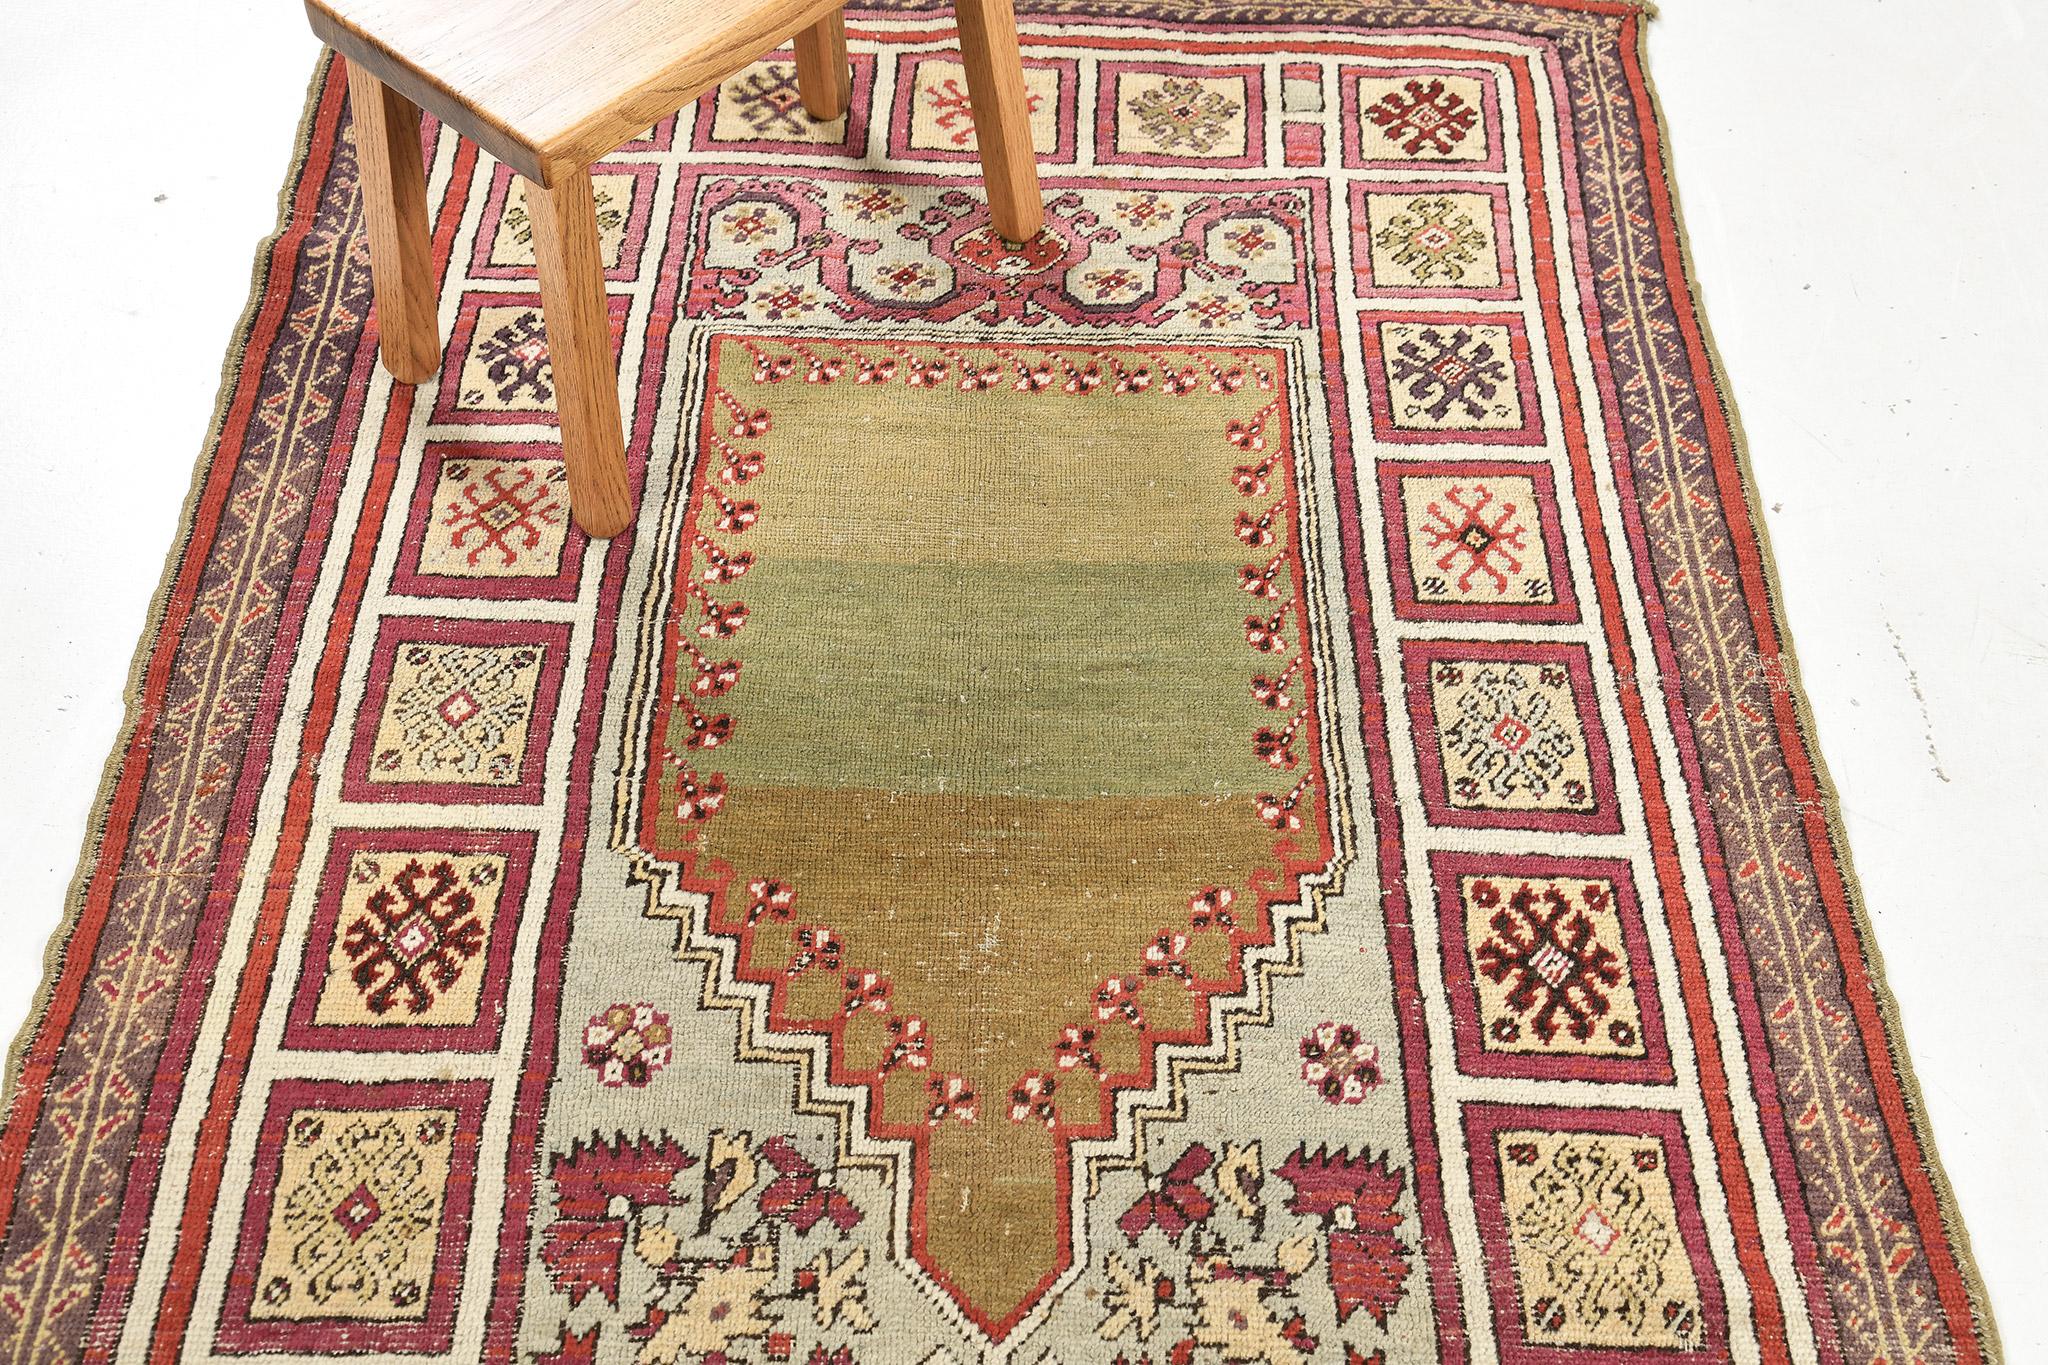 This remarkable Turkish Kirshir rug has its feature of multi-colored beautiful imagery. Compose of an arch-shaped design and surrounded by multiple motifs that make it's own and unique. A collector's item that ideal for wall decor and